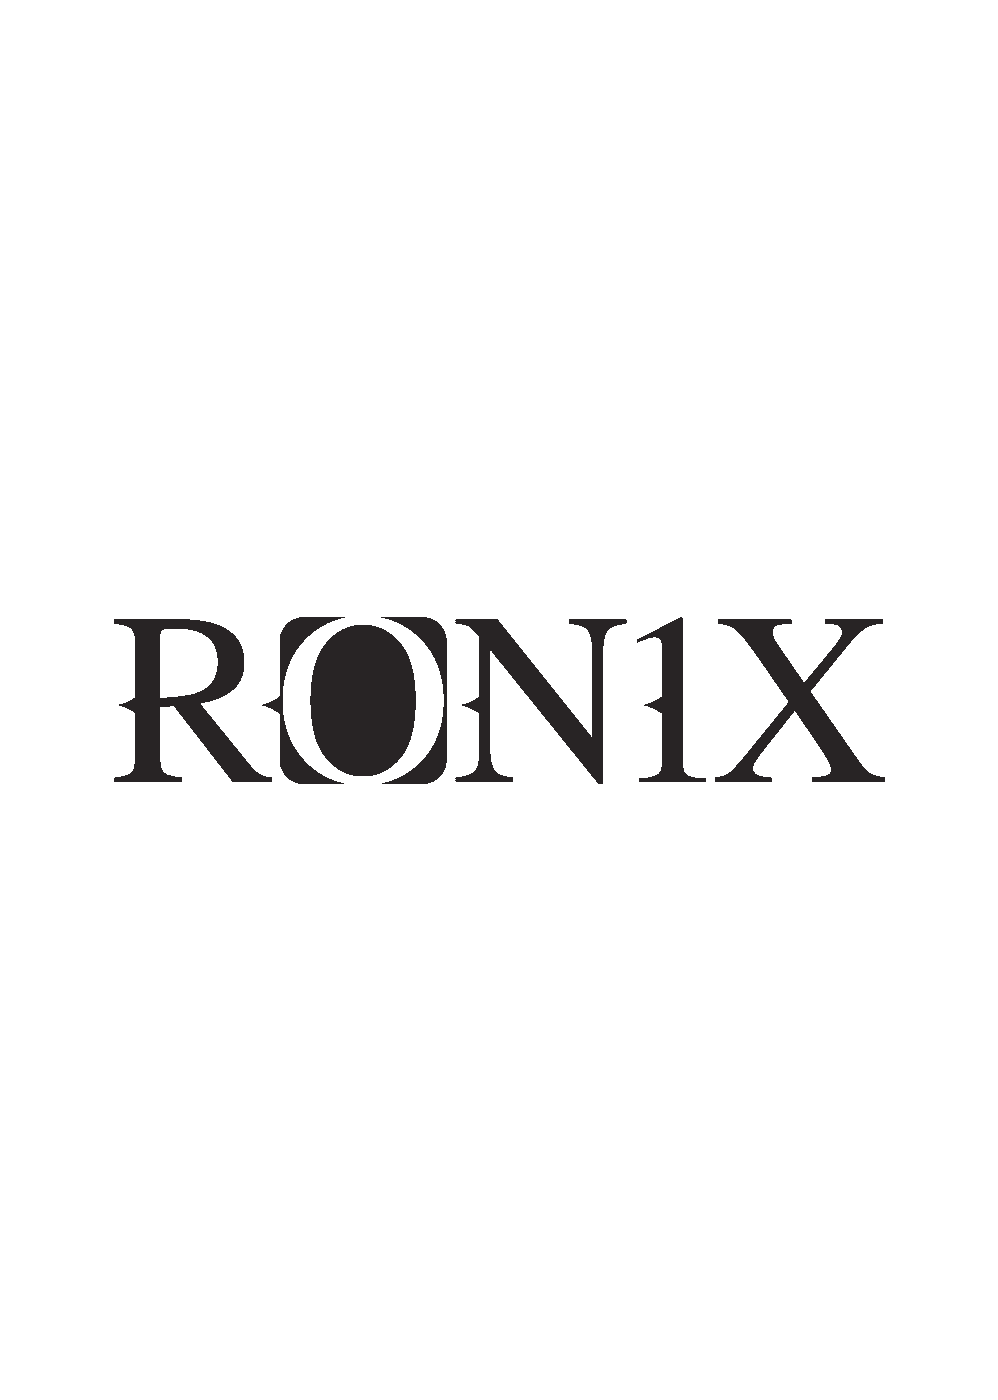 32" 2 Free Ronix Wakeboard Stickers Decal RONIX BANNER 48" 